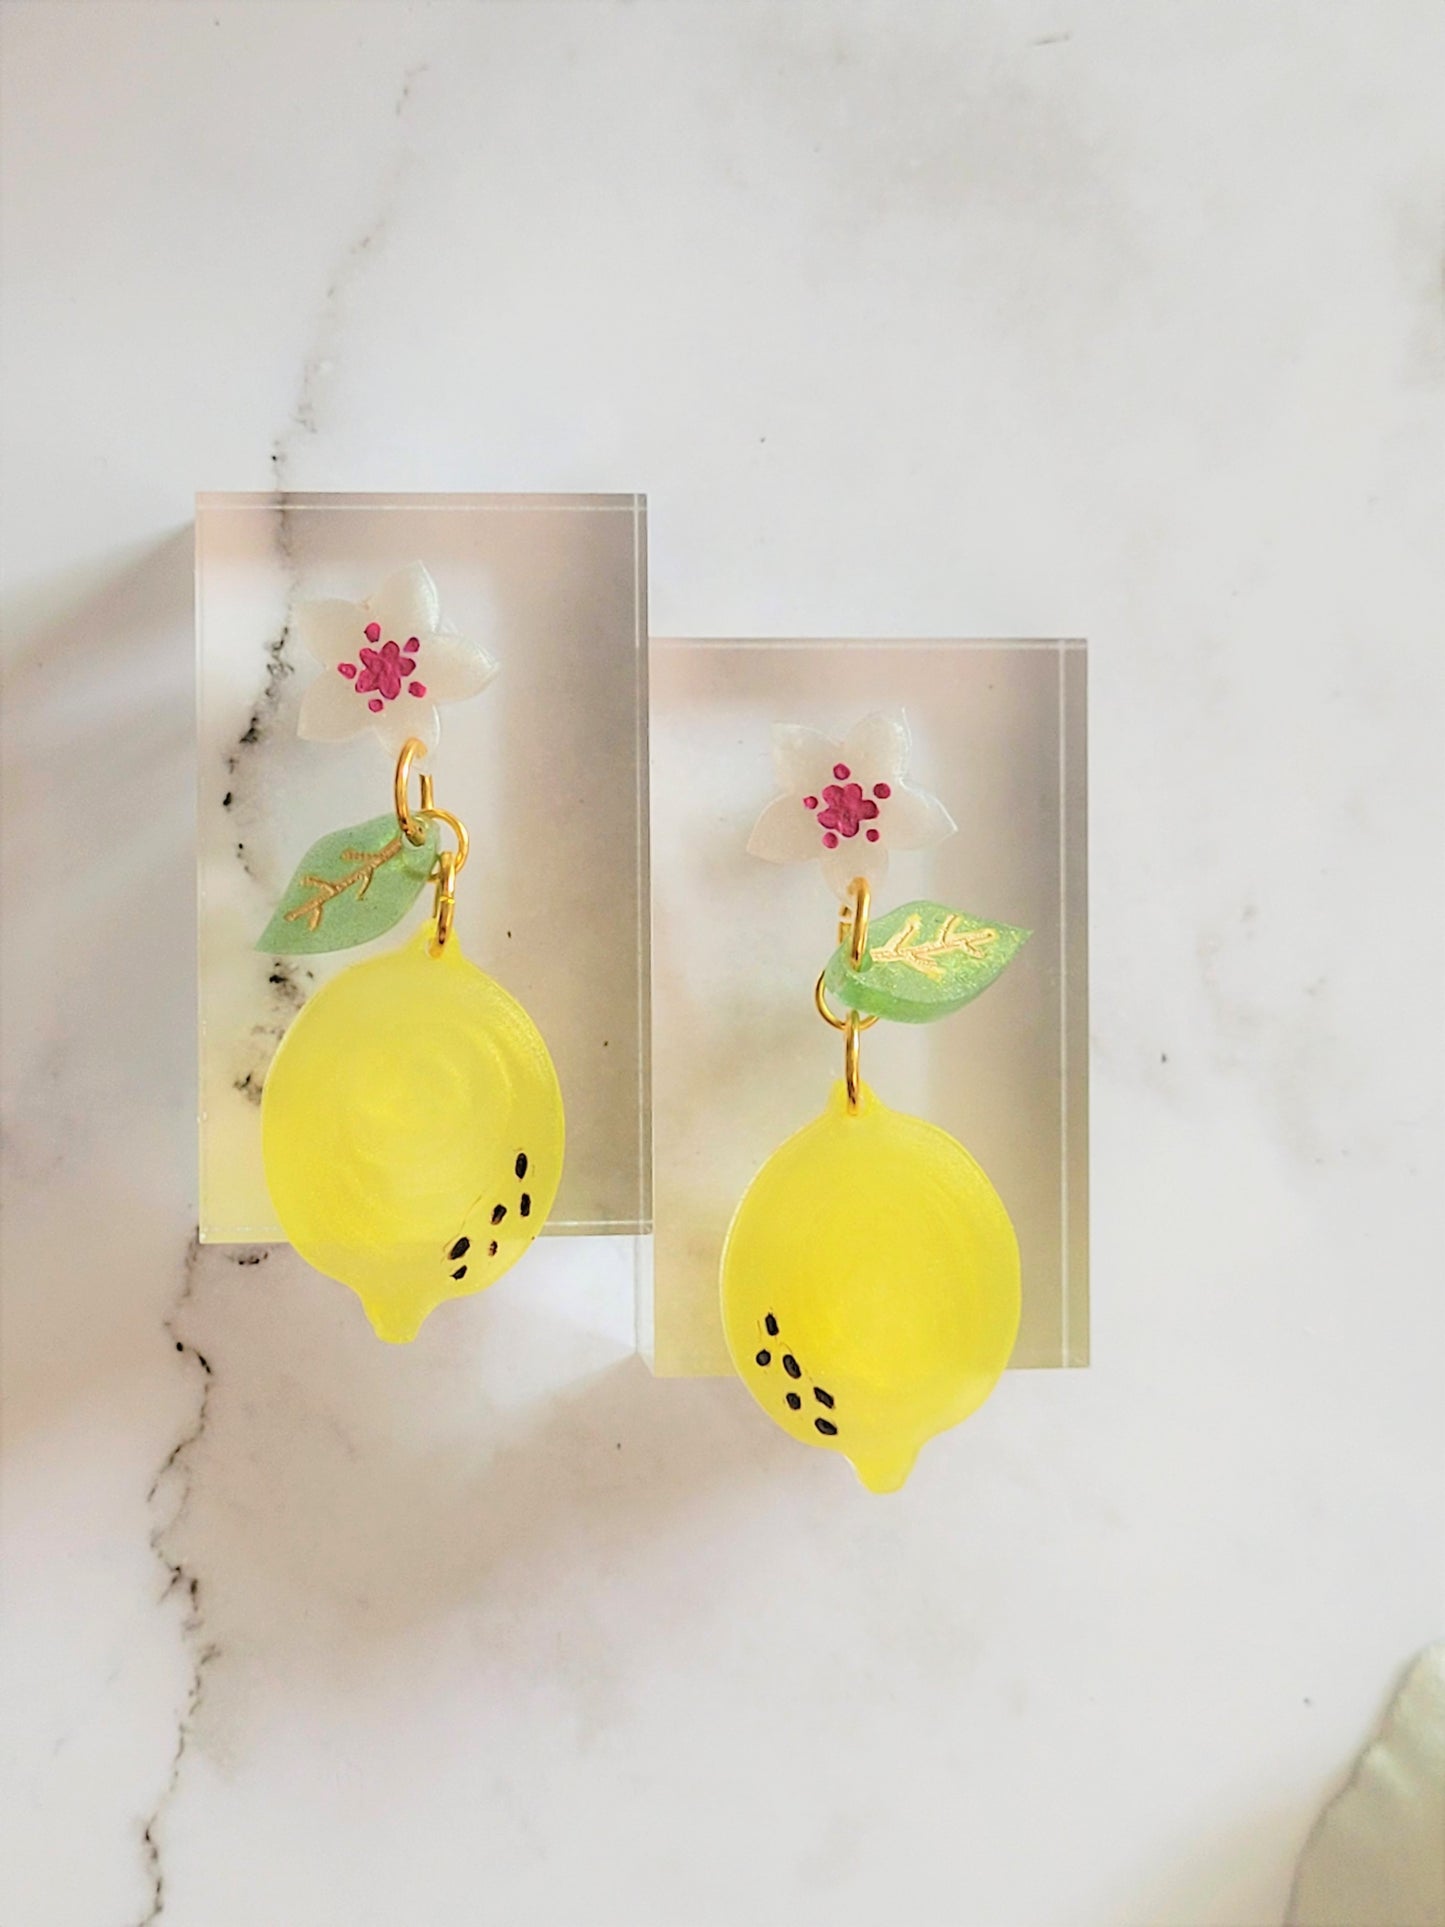 Closeup of resin earring featuring lemon blossom motif (flower, leaf, and fruit).